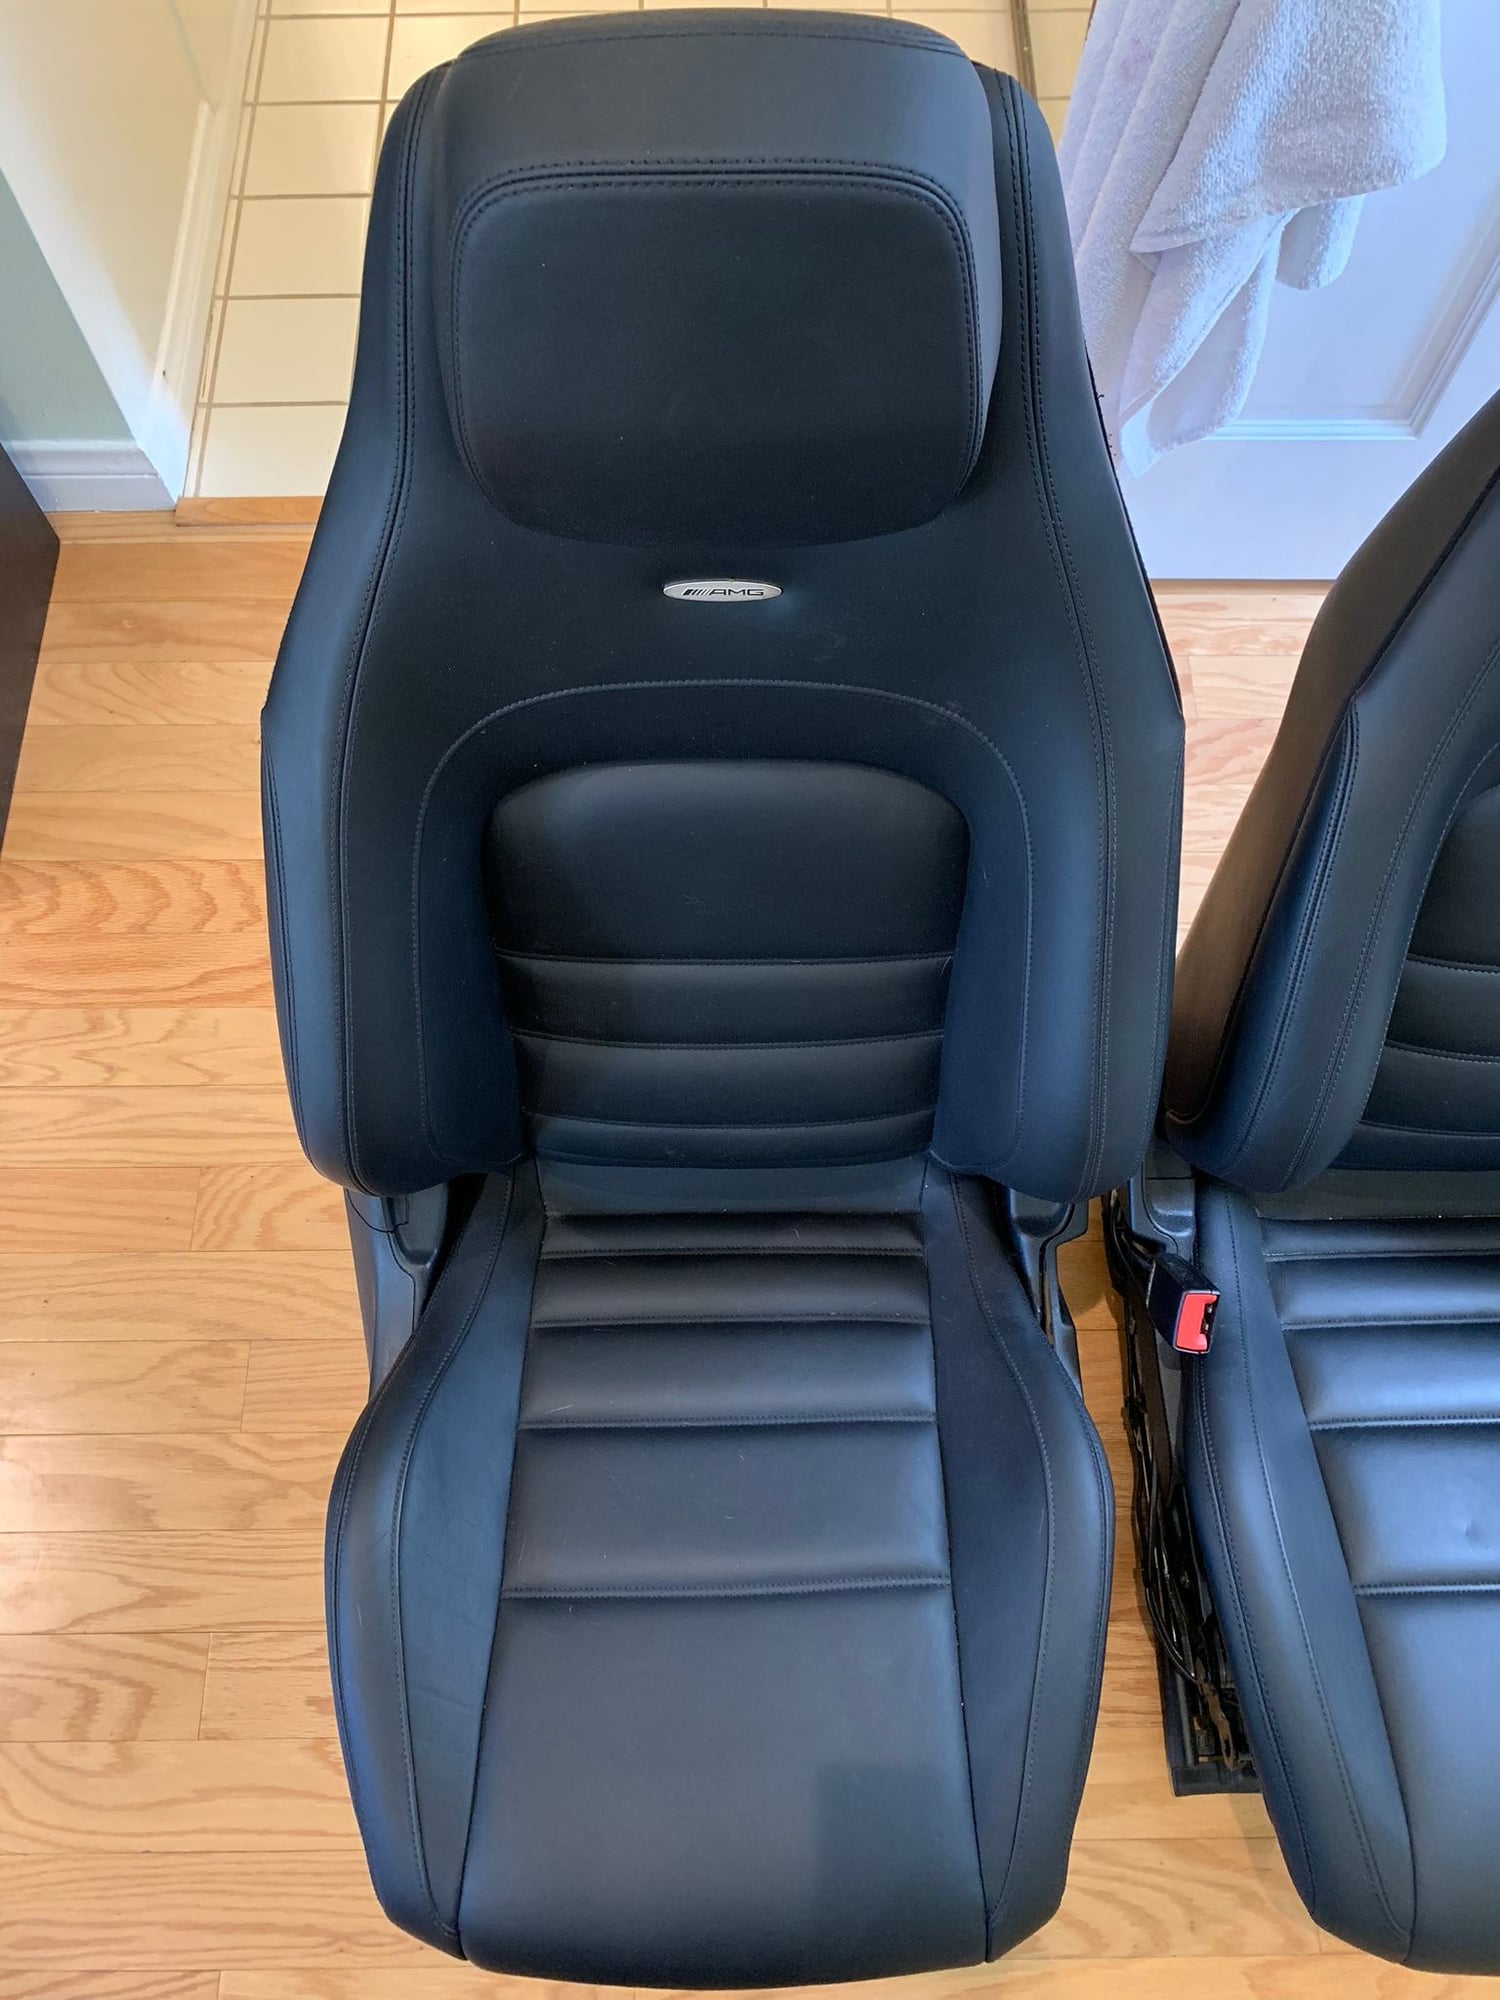 Interior/Upholstery - W204 C63 Coupe Front and Rear Seats - Used - 2008 to 2015 Mercedes-Benz C63 AMG - 2008 to 2015 Mercedes-Benz C300 - Santa Monica, CA 90403, United States